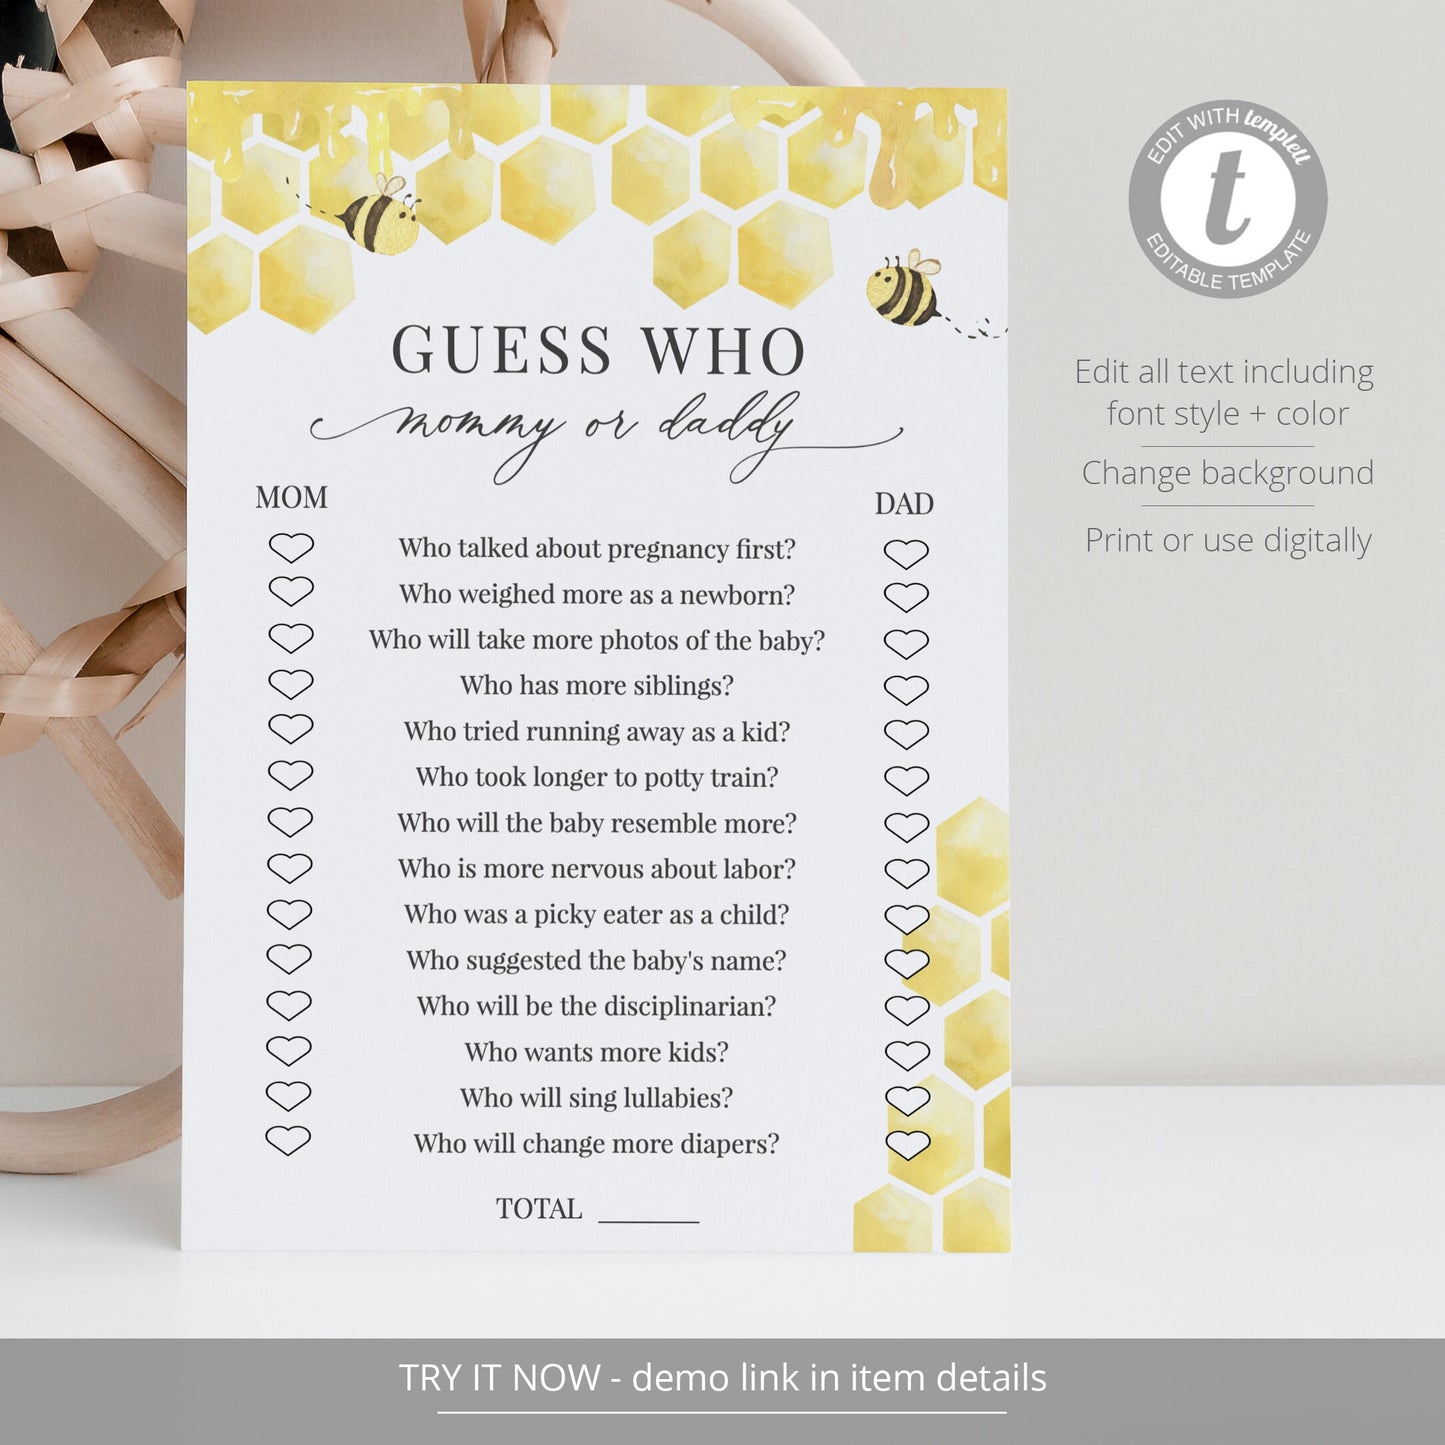 Editable Guess Who Mommy or Daddy Honeycomb Baby Shower Games Honey Bee Baby Games Template